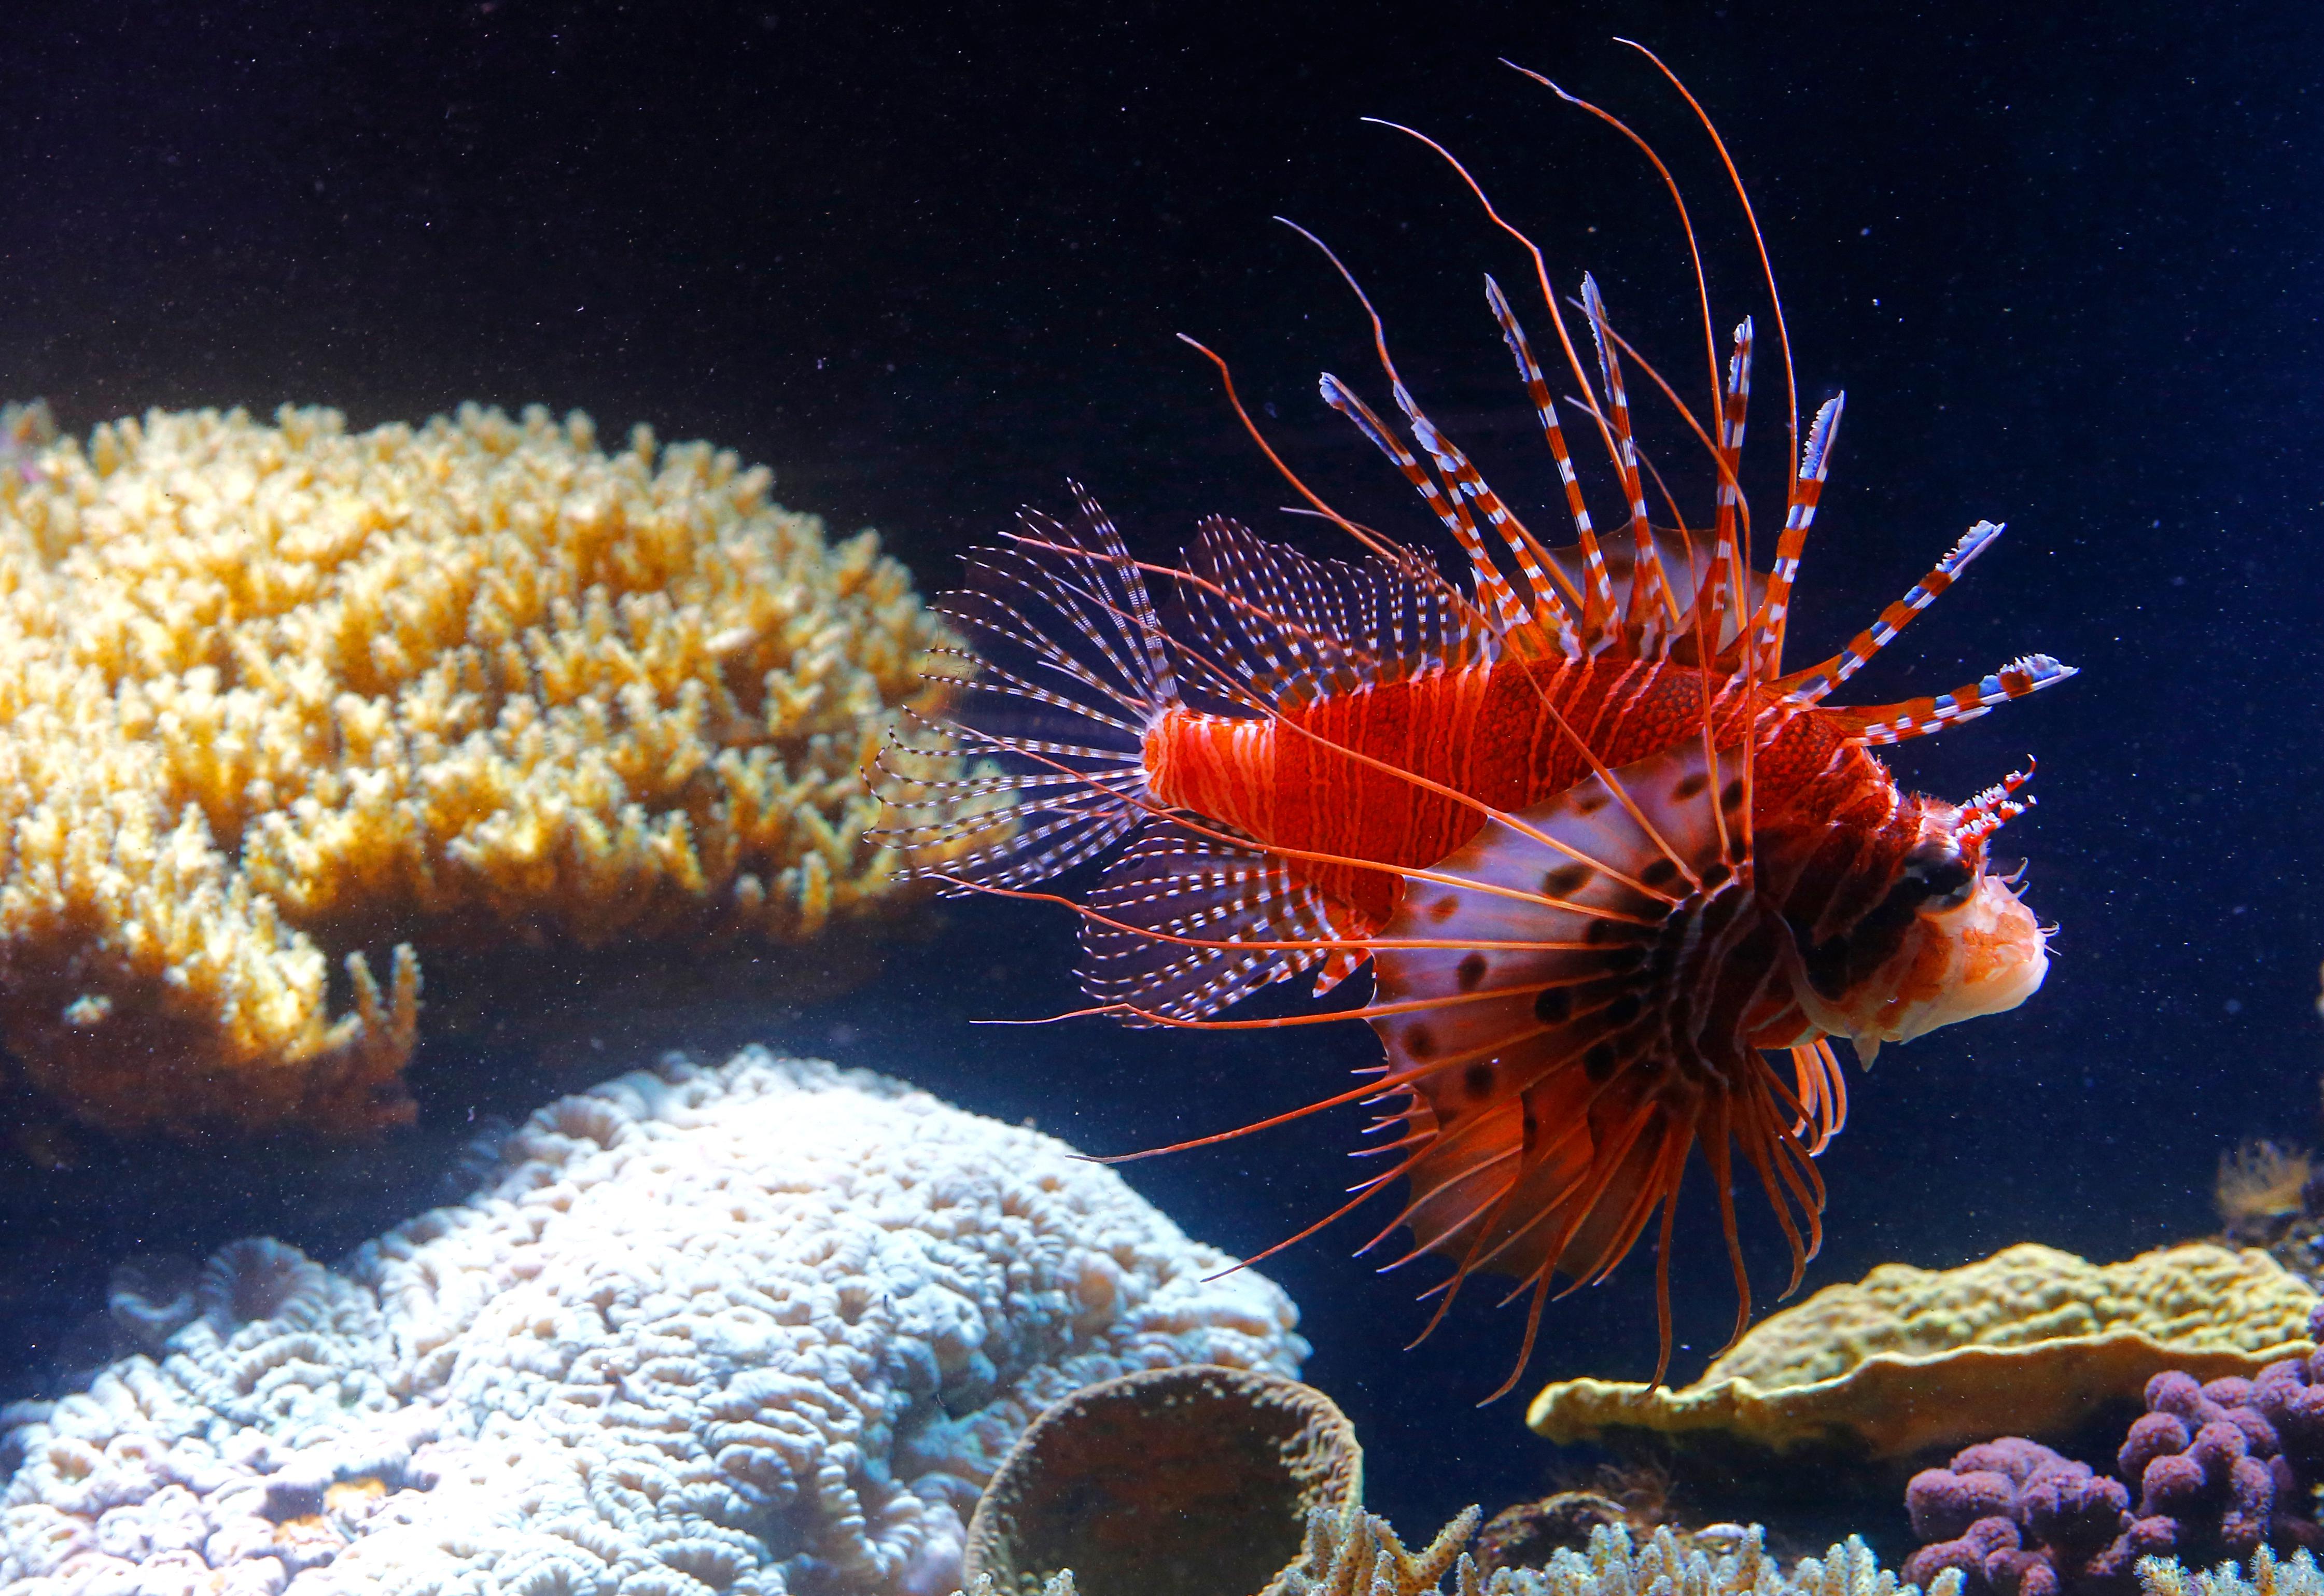 A Lionfish swims in a display tank in the aquarium on the United Arab Emirate of Sharjah on August 6, 2008.